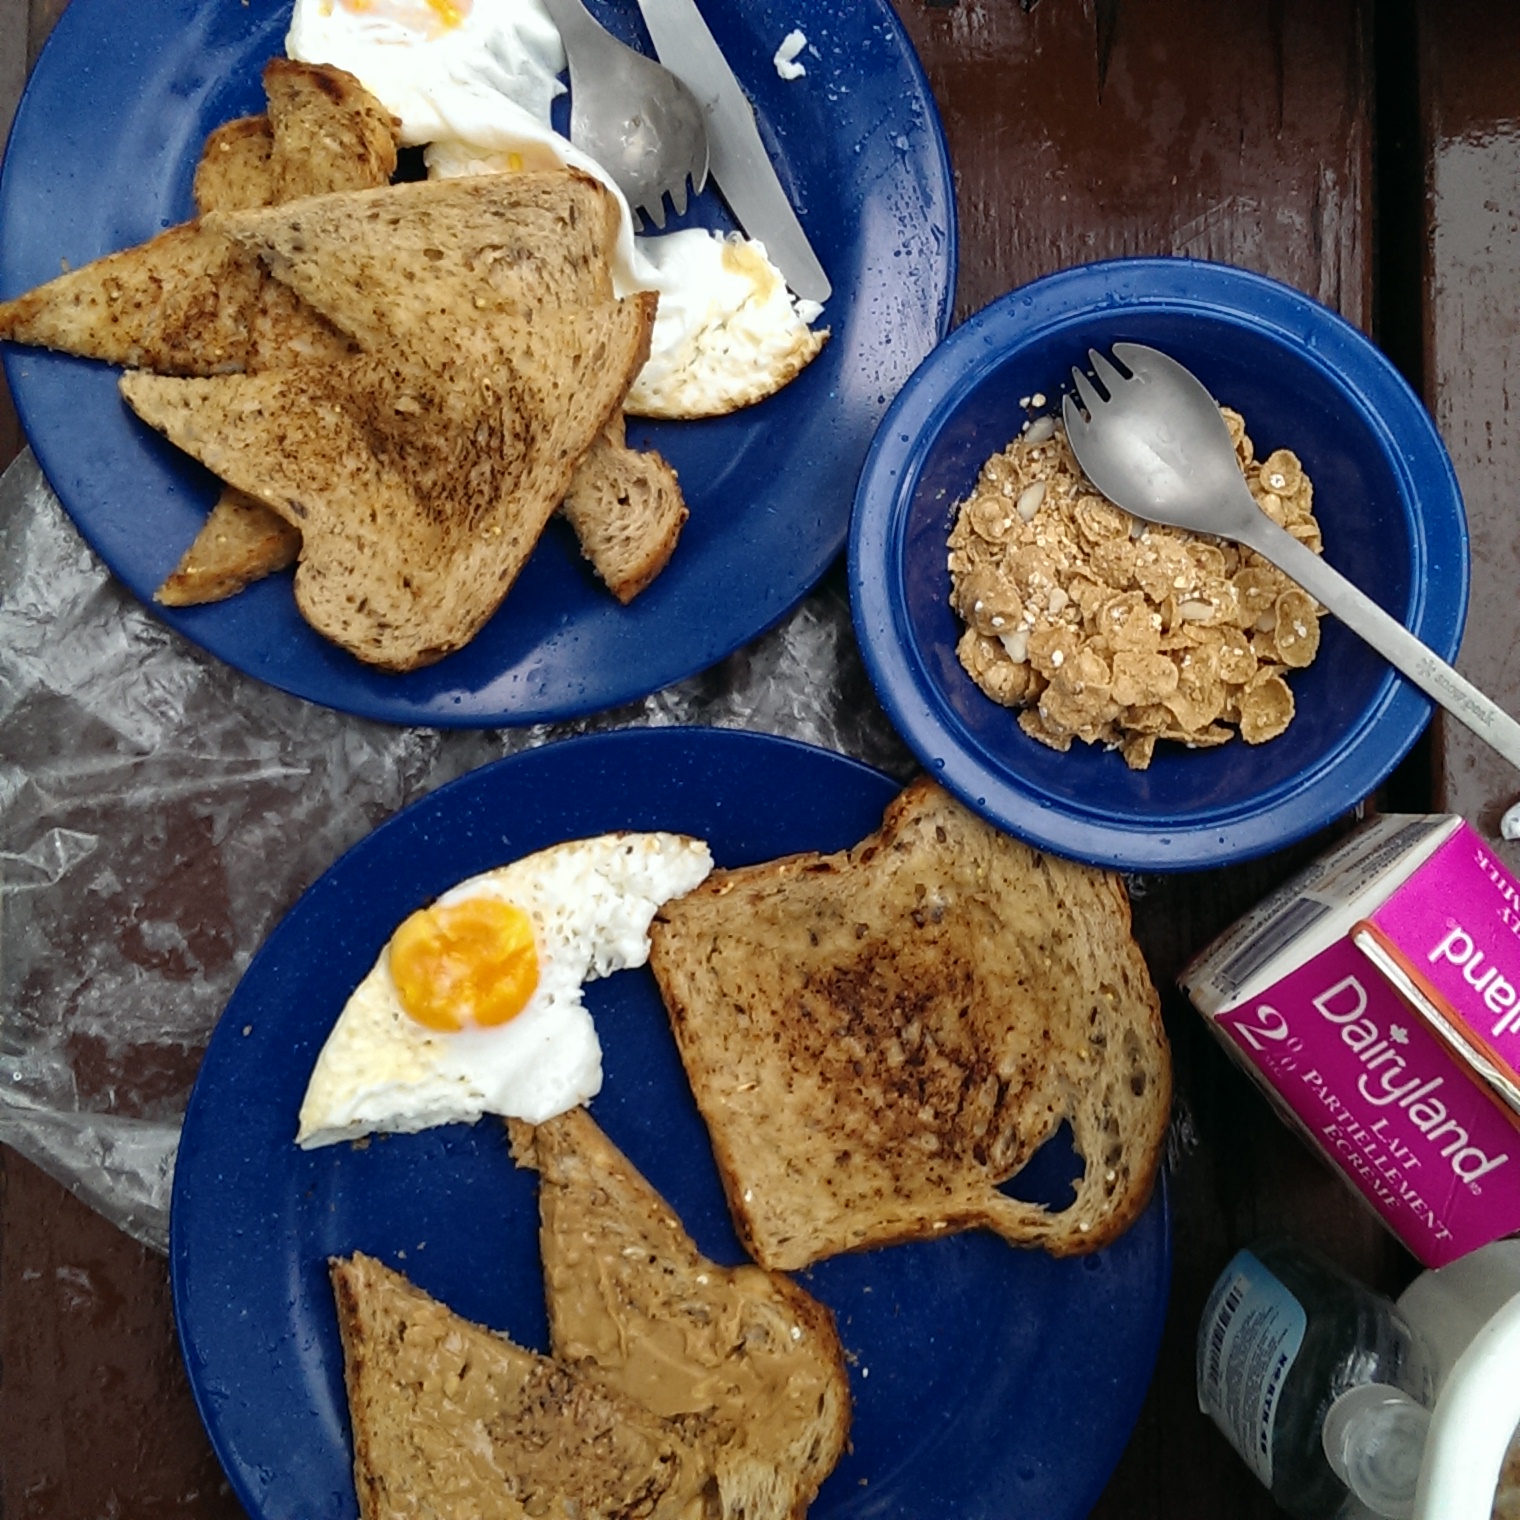 camping breakfast, another version